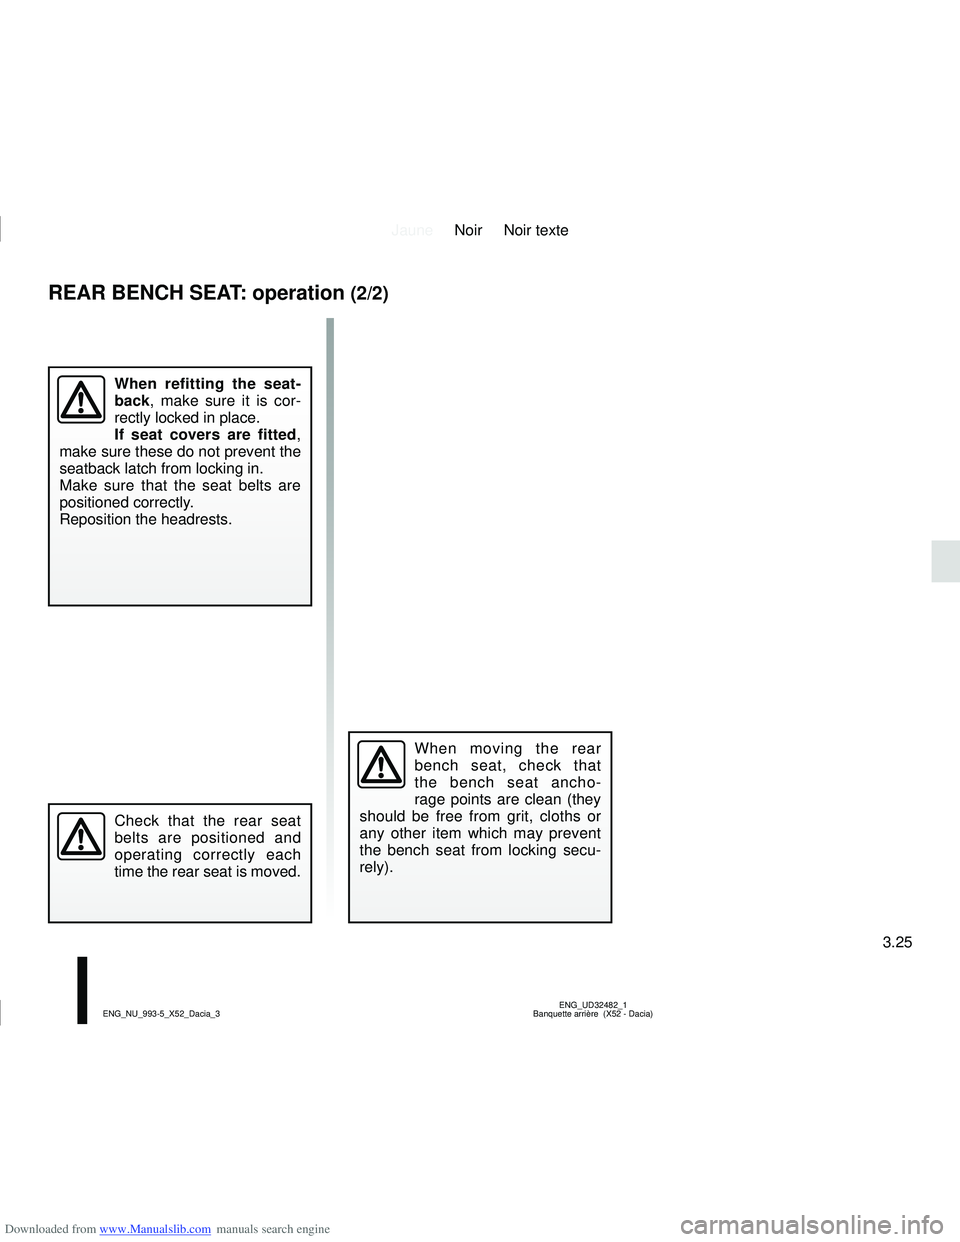 DACIA SANDERO 2019  Owners Manual Downloaded from www.Manualslib.com manuals search engine JauneNoir Noir texte
3.25
ENG_UD32482_1
Banquette arrière  (X52 - Dacia)
ENG_NU_993-5_X52_Dacia_3
REAR BENCH SEAT: operation (2/2)
Check that 